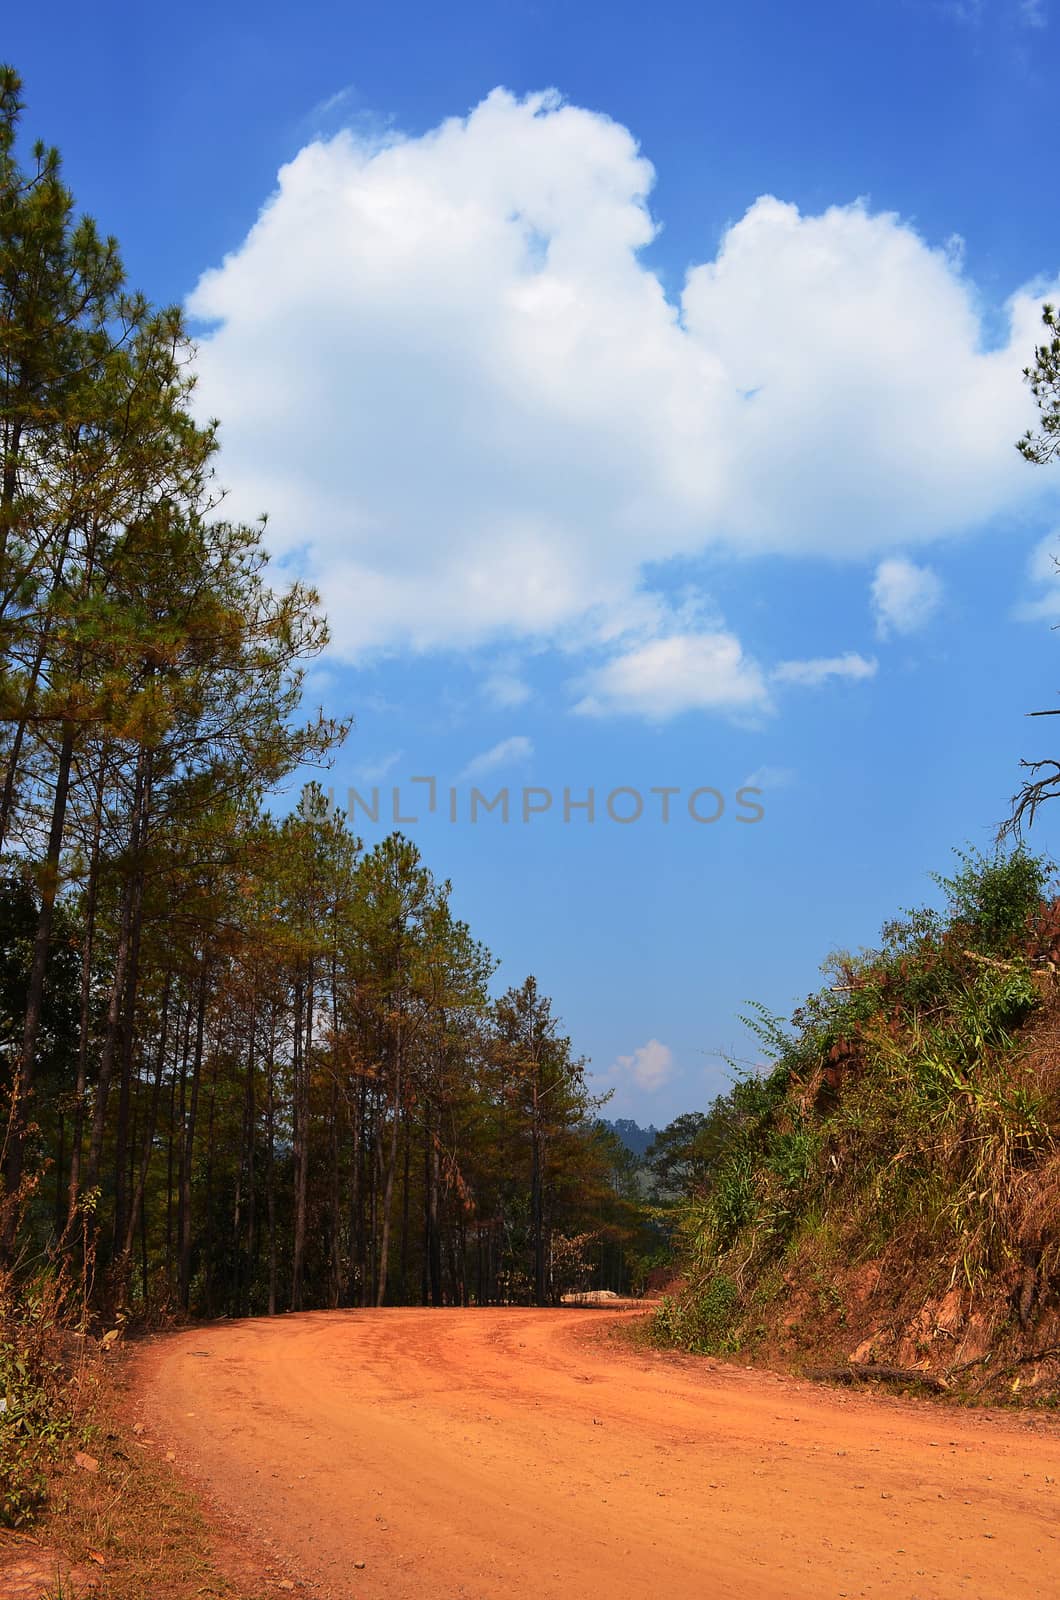 Non-Asphalt Paved Road with Pine Forest and Cloudy Blue Sky by kobfujar